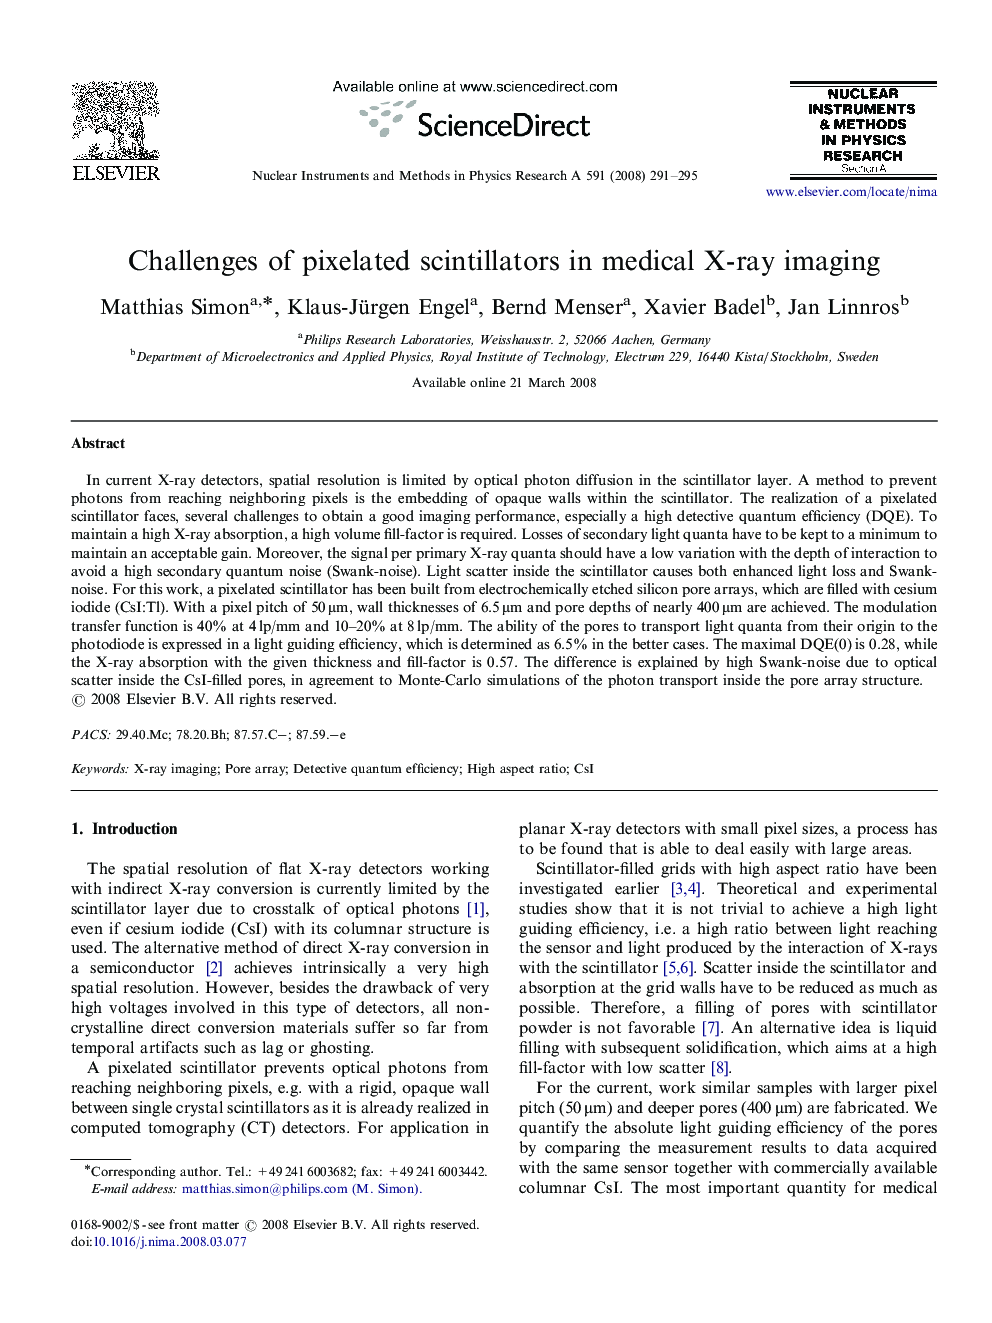 Challenges of pixelated scintillators in medical X-ray imaging